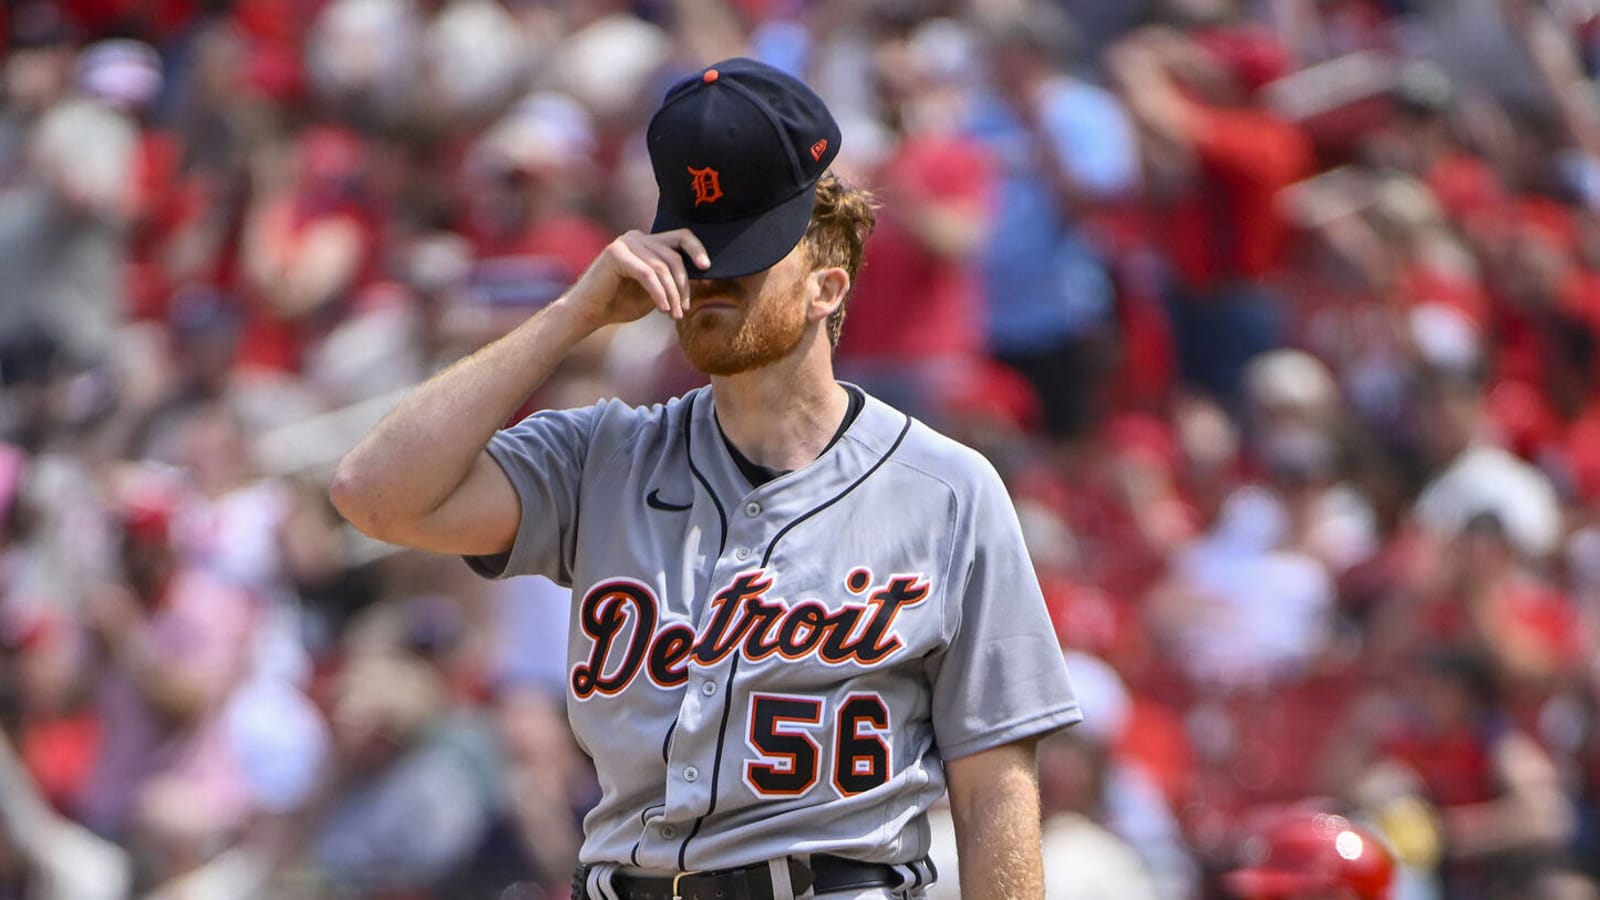 Tigers starter hurt yet again in latest setback